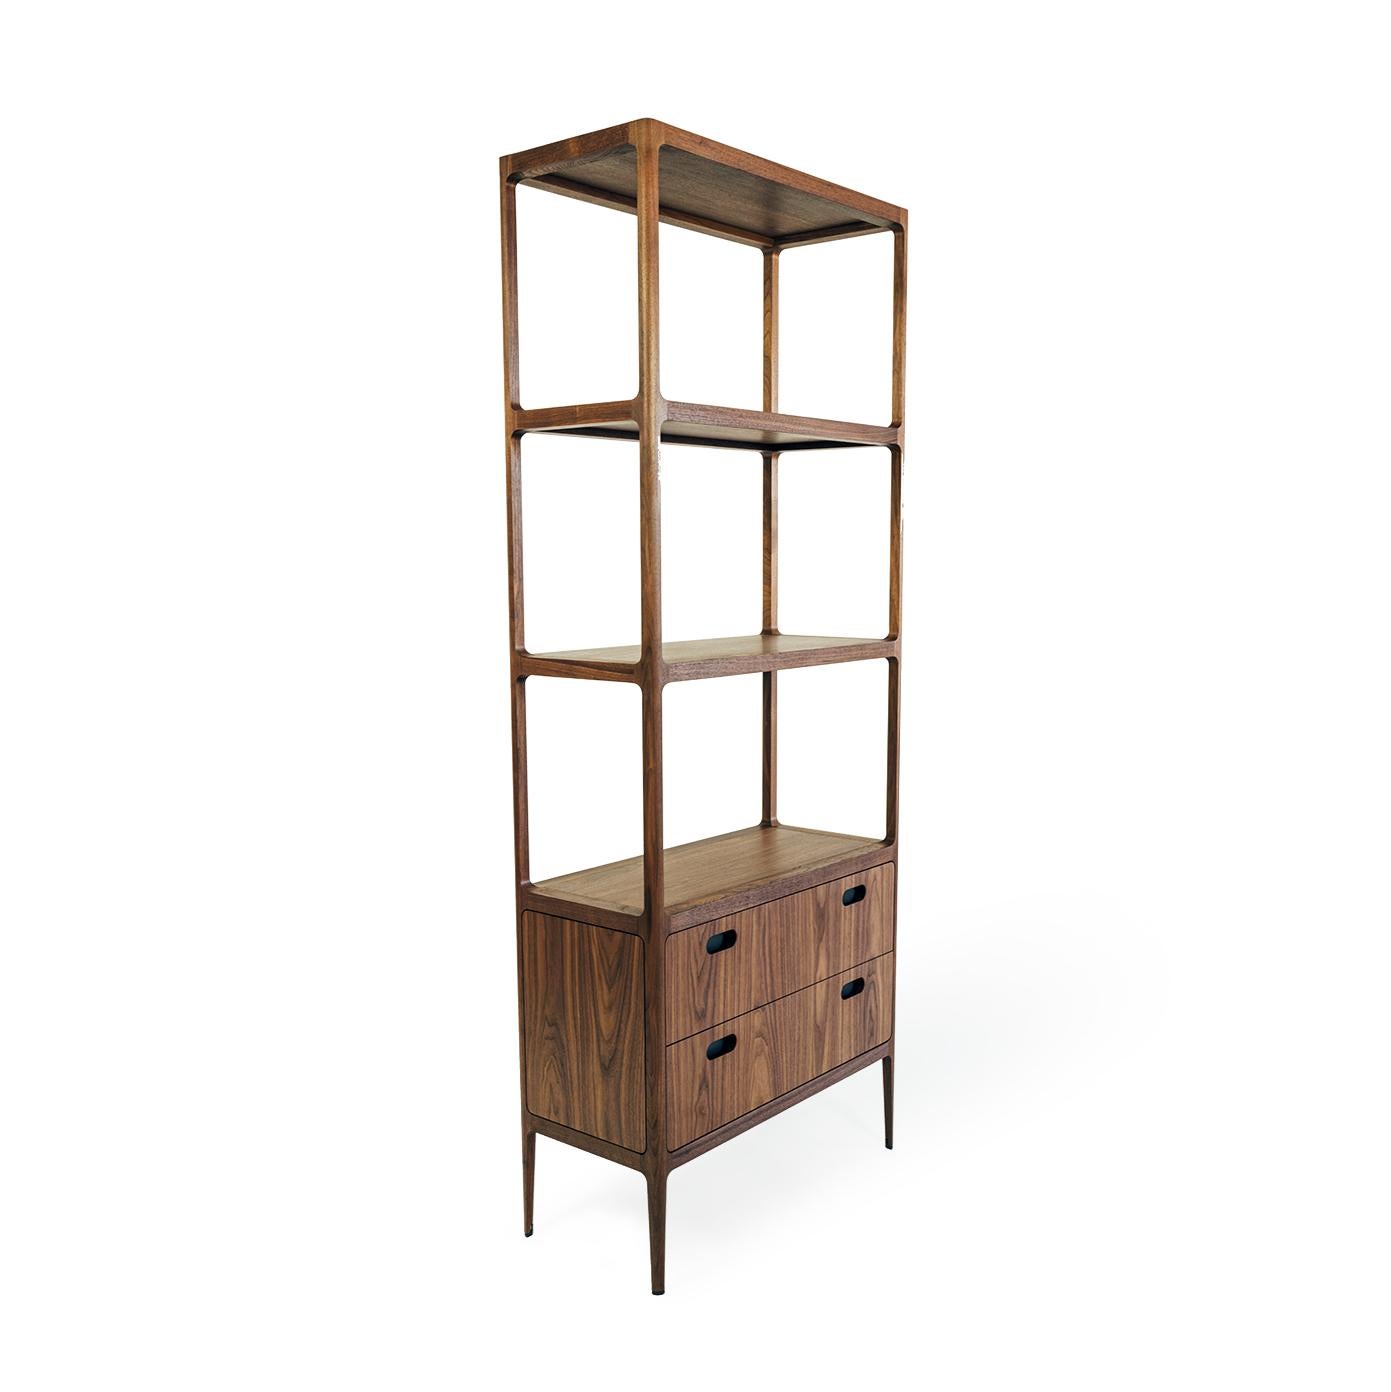 This shelving unit draws inspiration from midcentury designs and fits beautifully with both traditional and contemporary interiors. Designed by Munson Furniture to be used as a bookshelf, display case or bar, the dimensions are all customizable. As